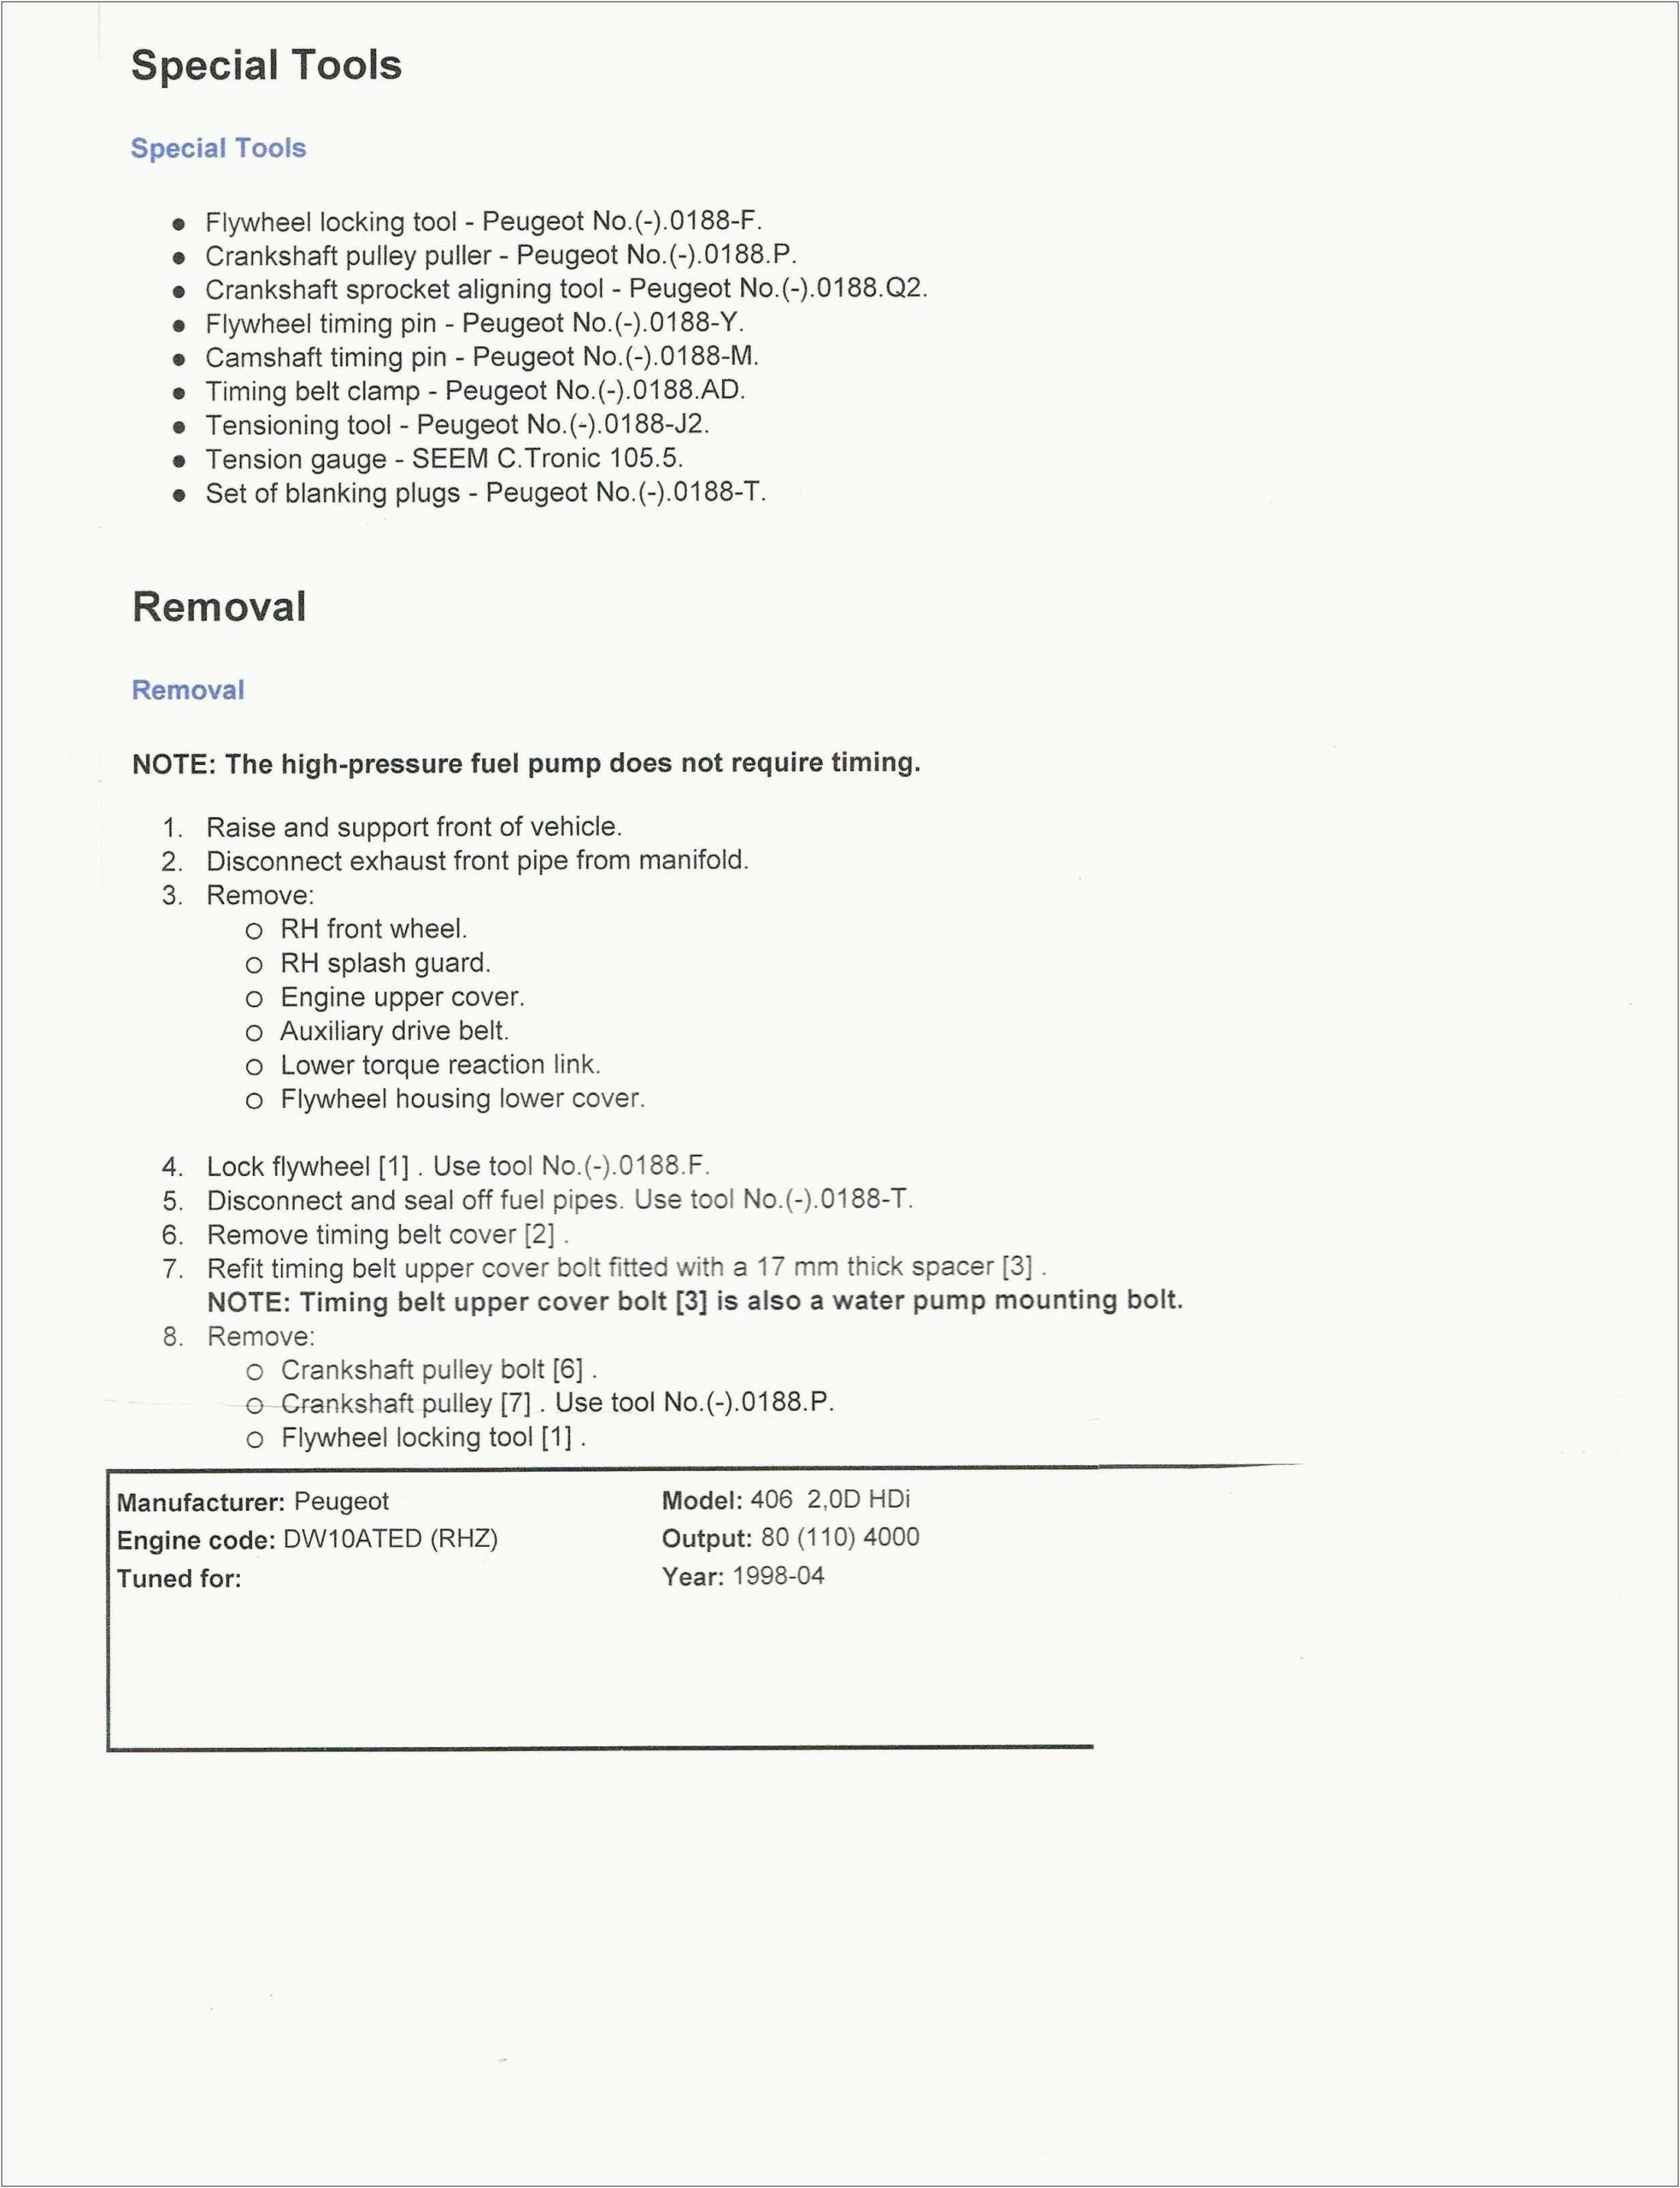 Resume For Roofing Project Manager